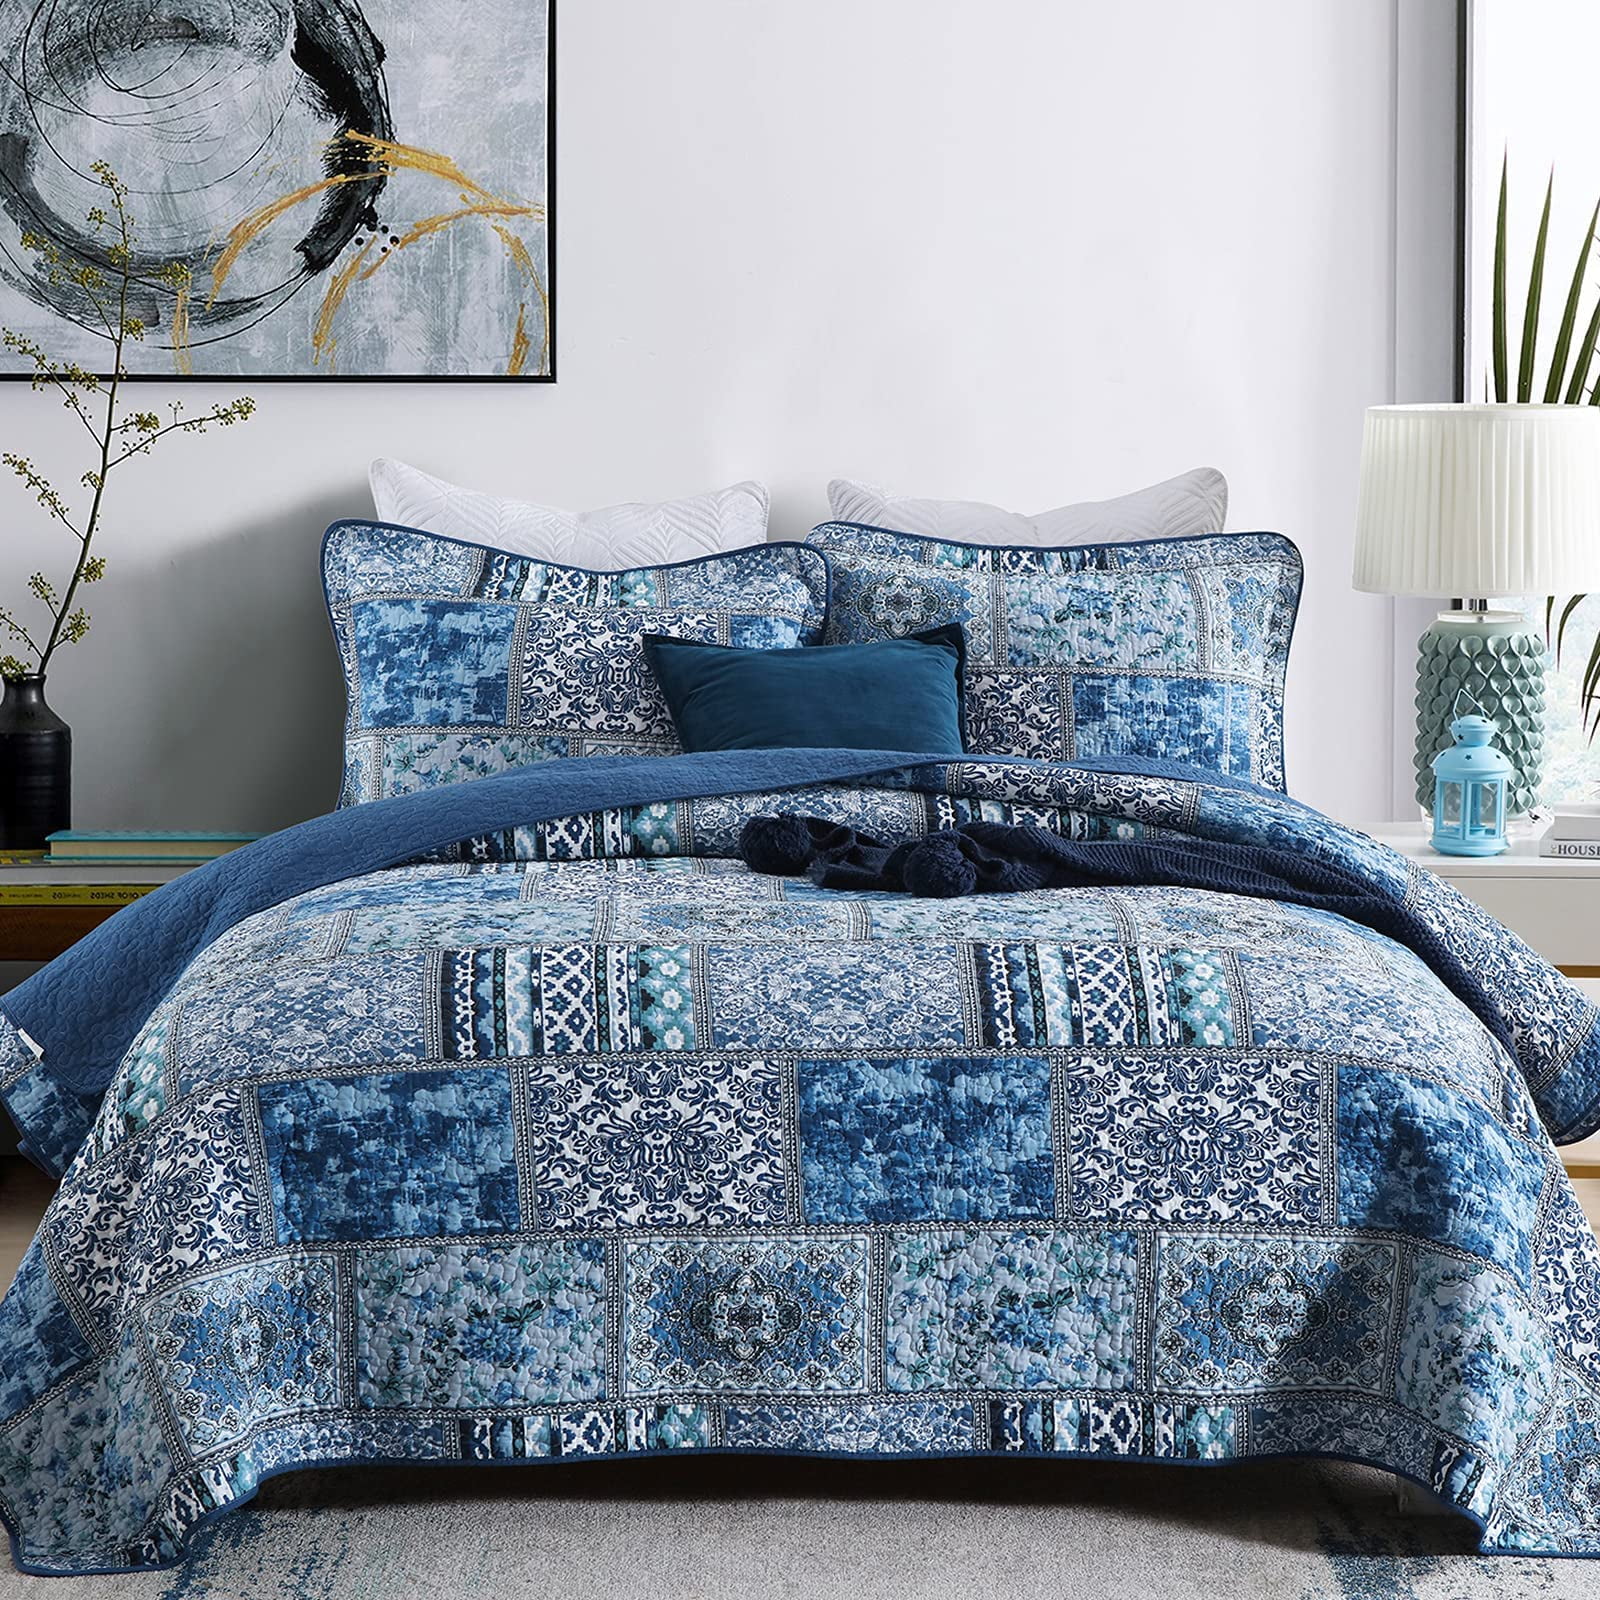 3 Pieces Boho Cotton Quilt Set for All Season Oversize Queen 90x98 inches 100% Cotton Reversible Rustic Patchwork Printed Bedding Quilt Coverlet Blue Bohemain Bedspread Quilt Queen 